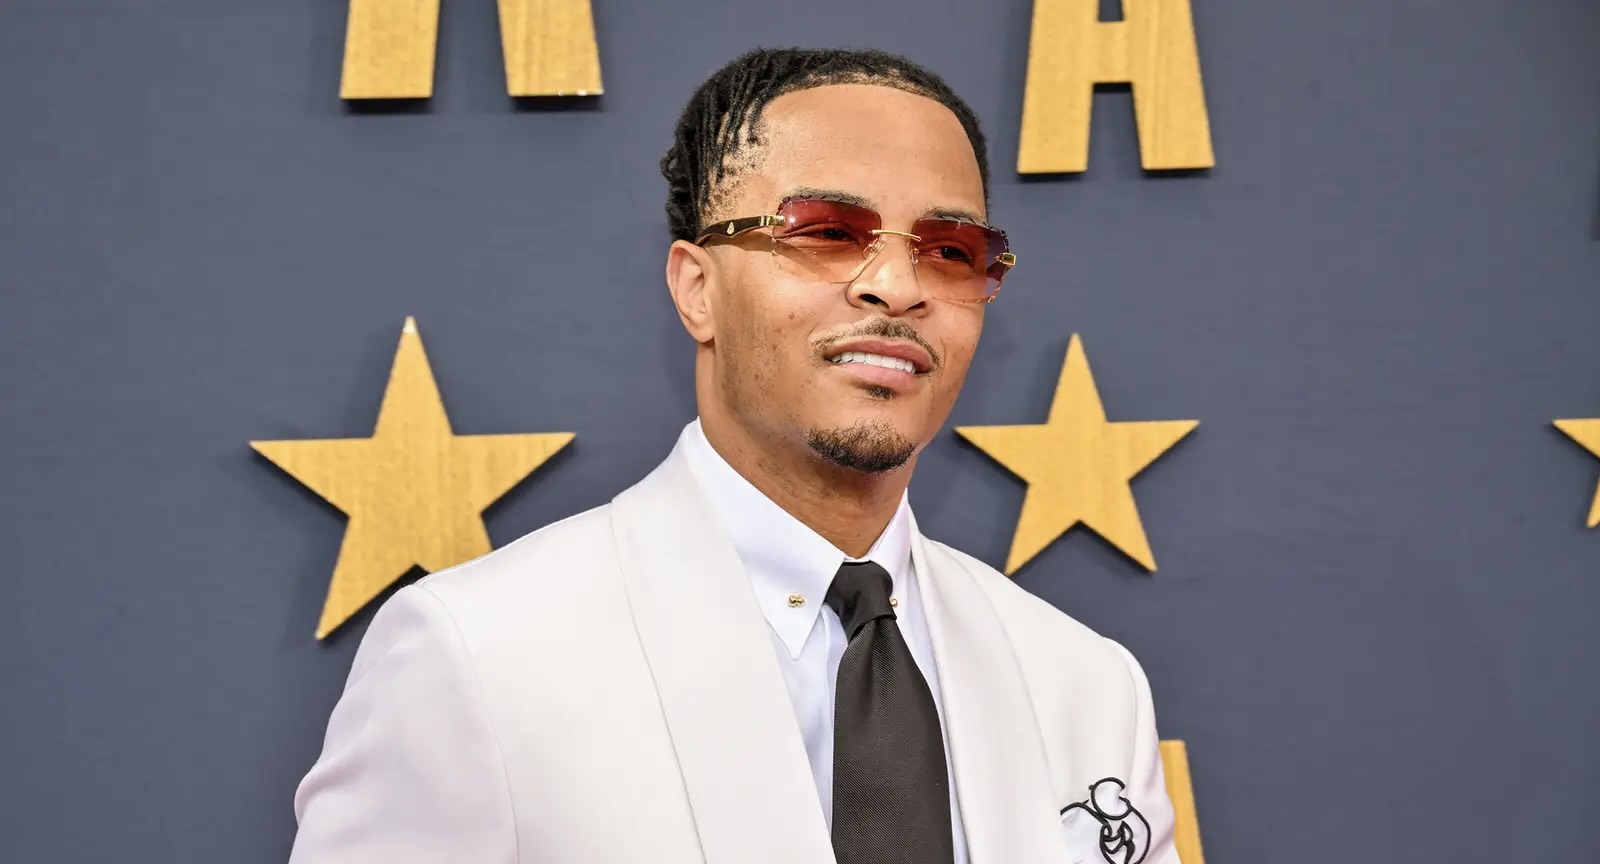 T.I. Set to Make Televised Stand-Up Comedy Debut In ‘Comic View’ Reboot